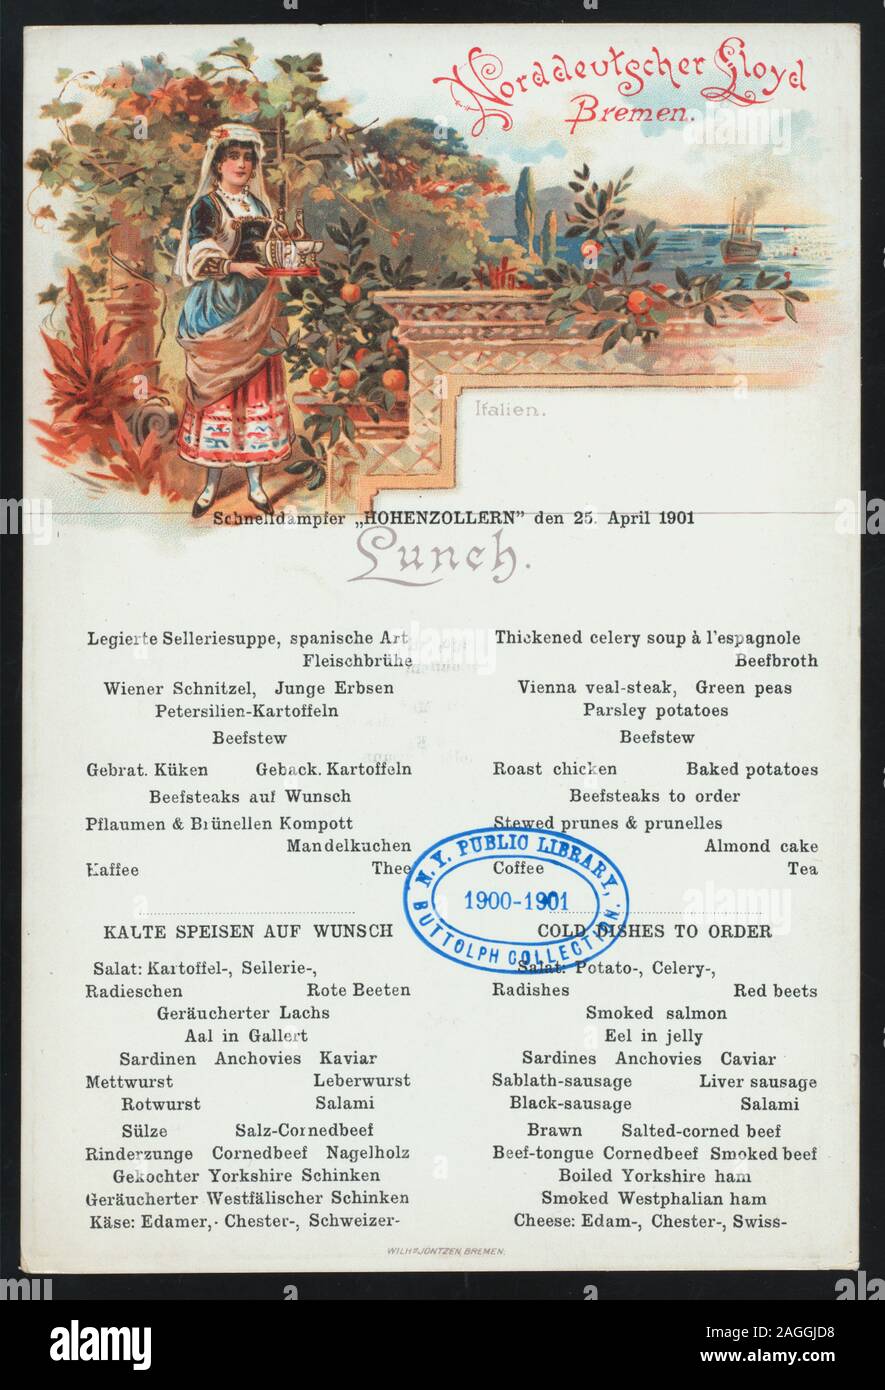 GERMAN & ENGLISH; ILLUSTRATION OF MYTHICAL FIGURES, ANCHORS, SMALL STEAMSHIP; CONCERT PROGRAMM ON BACK COVER; Citation/Reference: 1901-0995A; LUNCH [held by] NORDDEUTSCHER LLOYD BREMEN [at] SCHNELLDAMPFER HOHENZOLLERN (SS;) Stock Photo